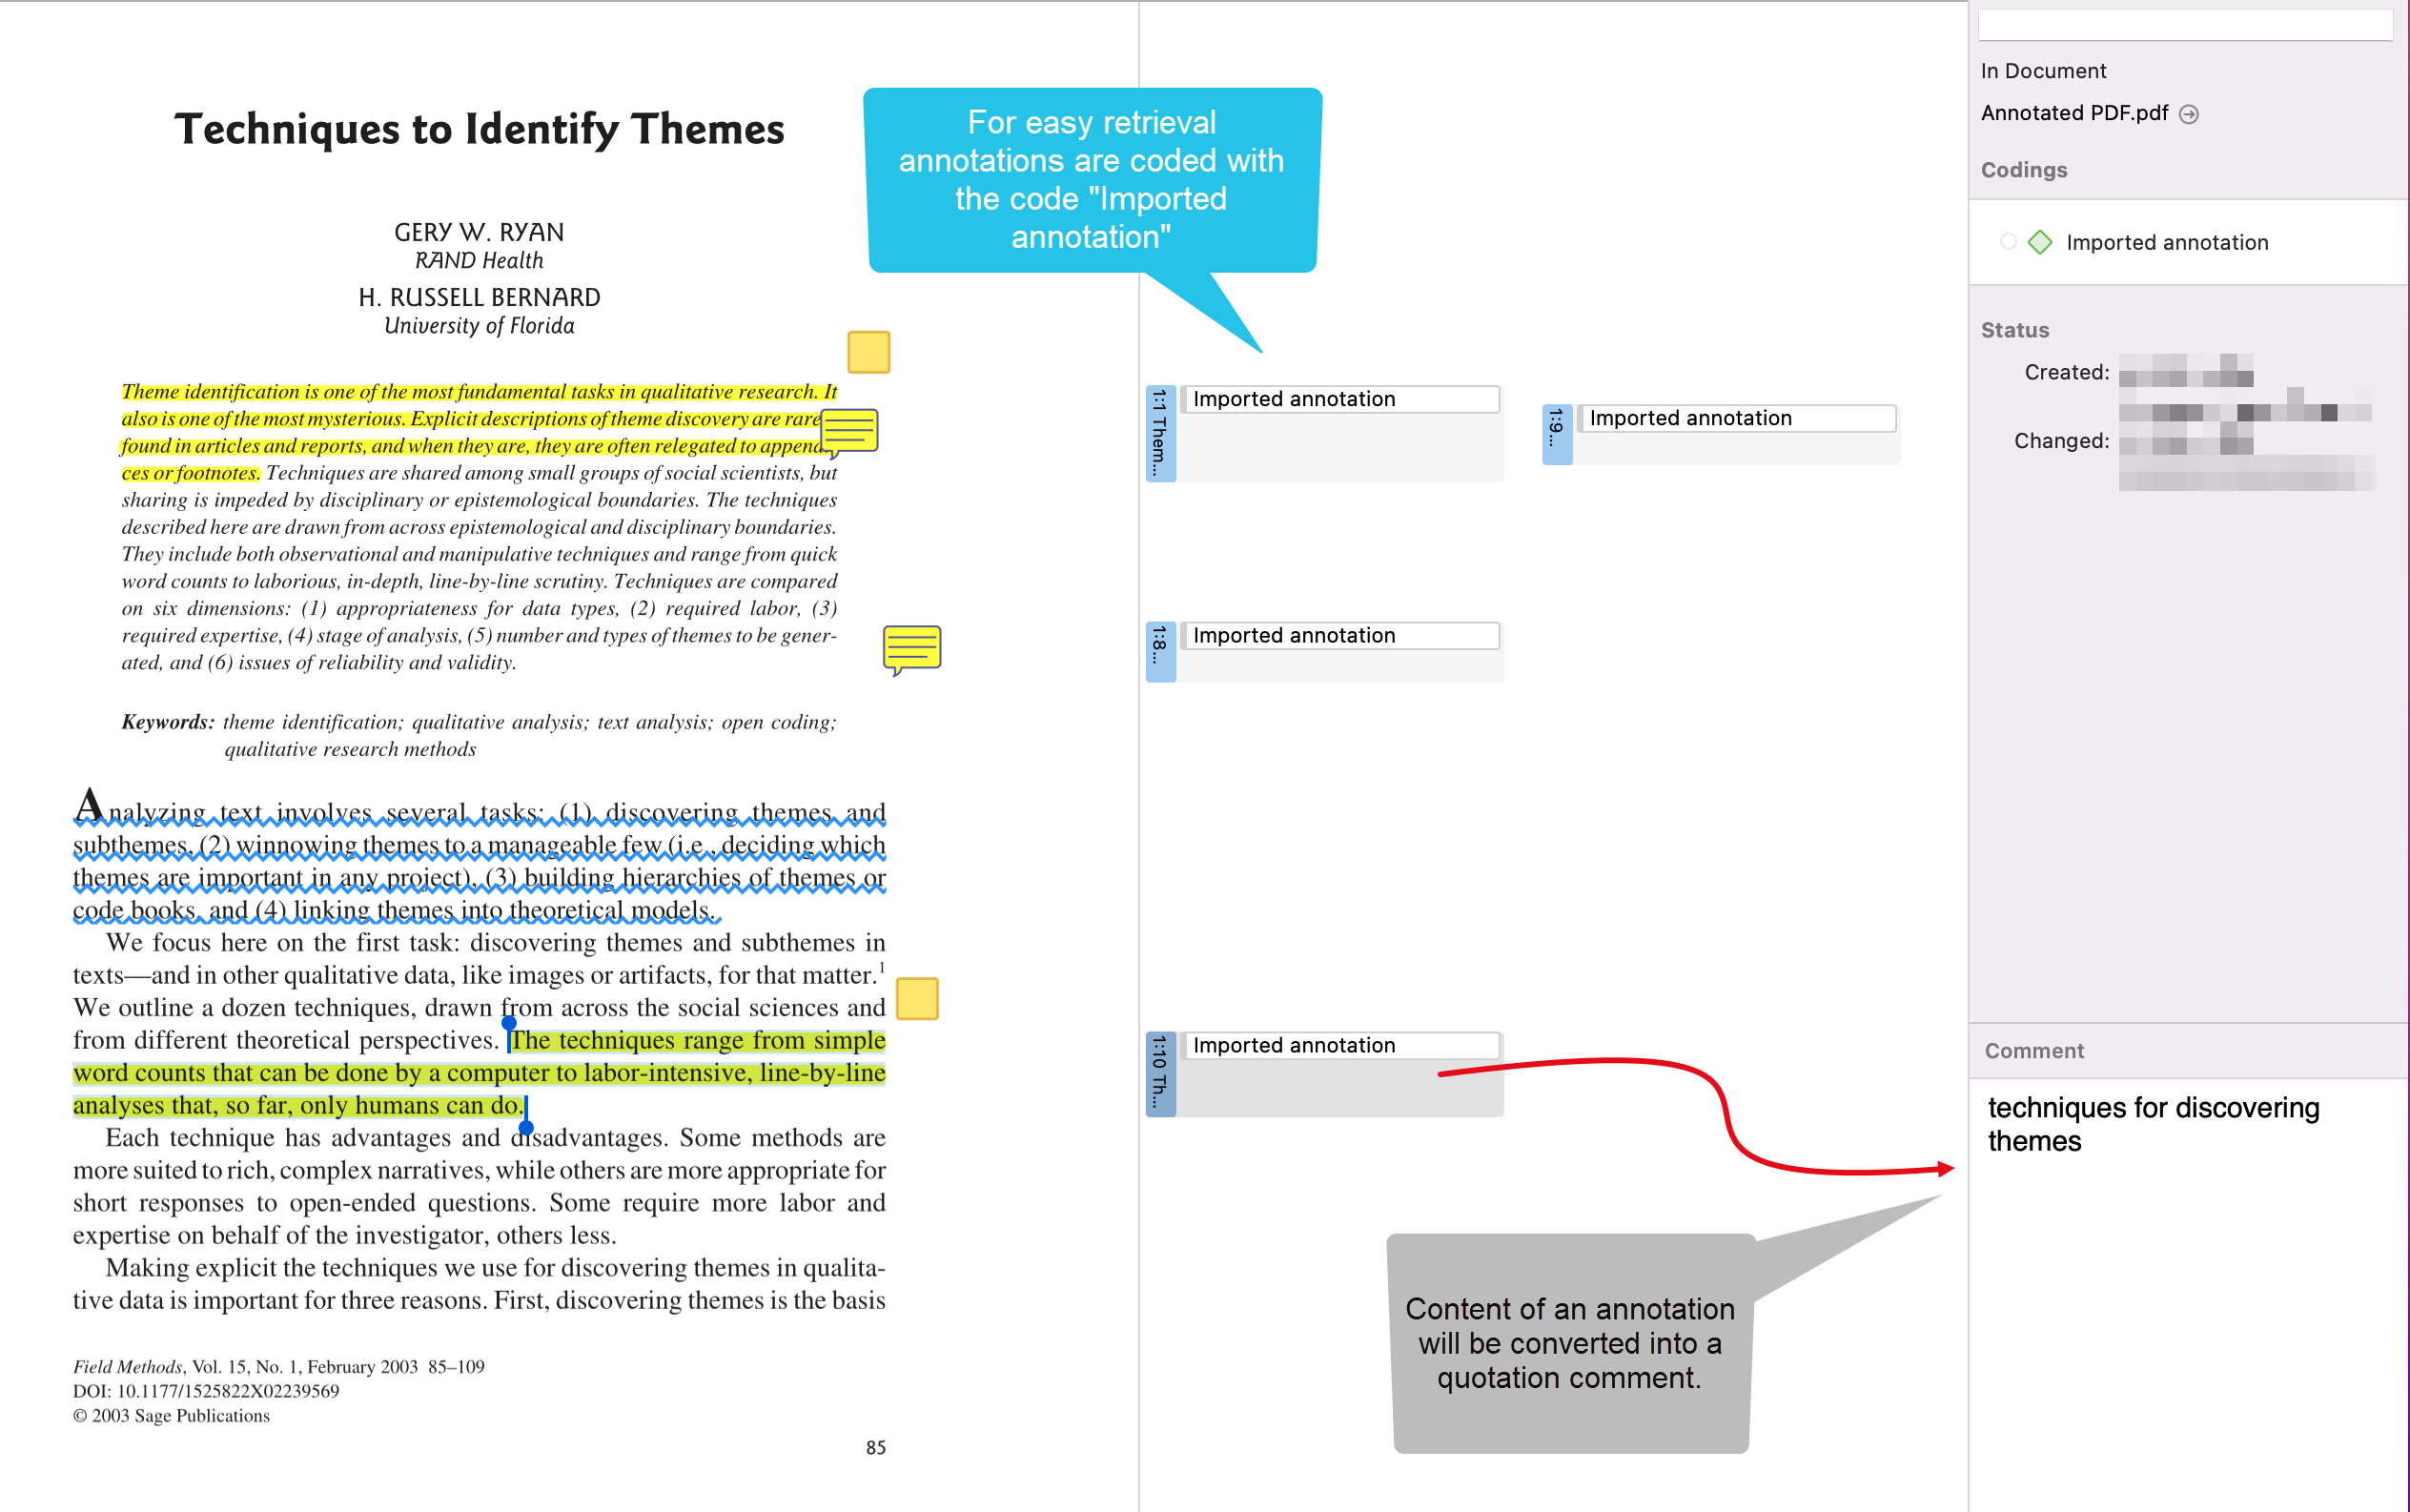 Imported PDF documents with annotations